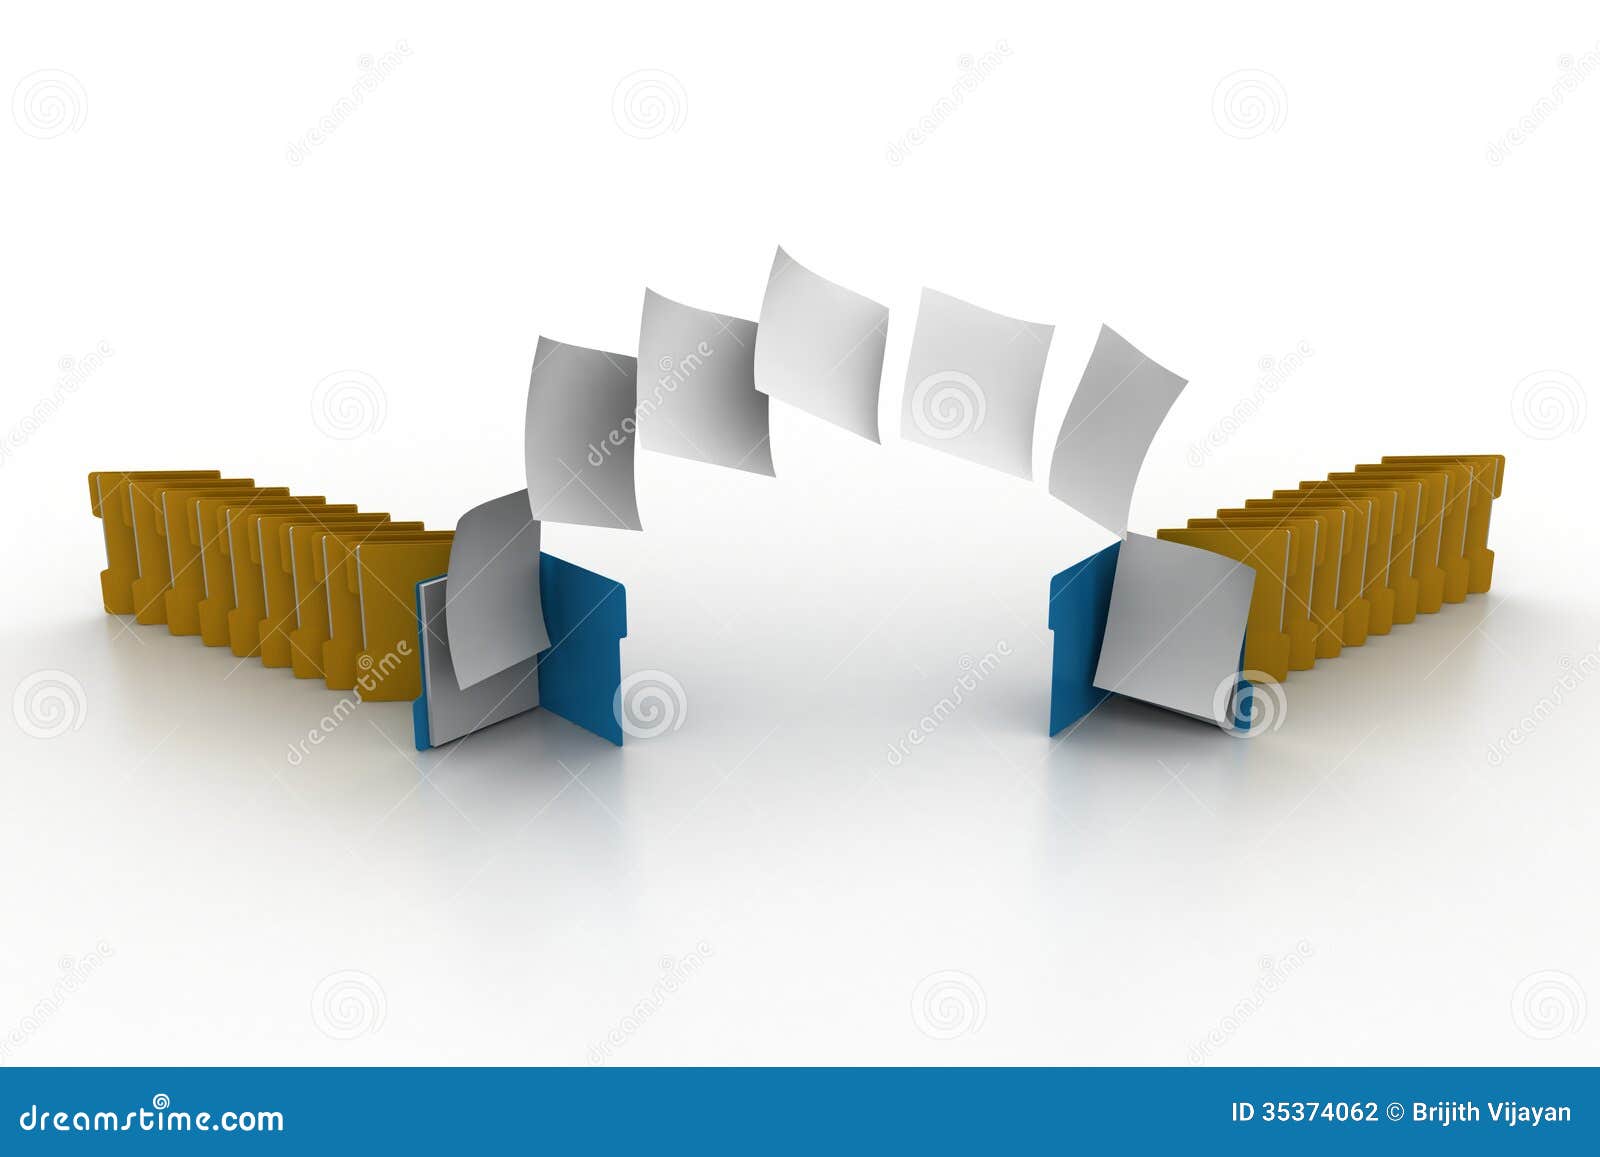 Documents Moving One Folder To Another Stock Photography - Image: 35374062